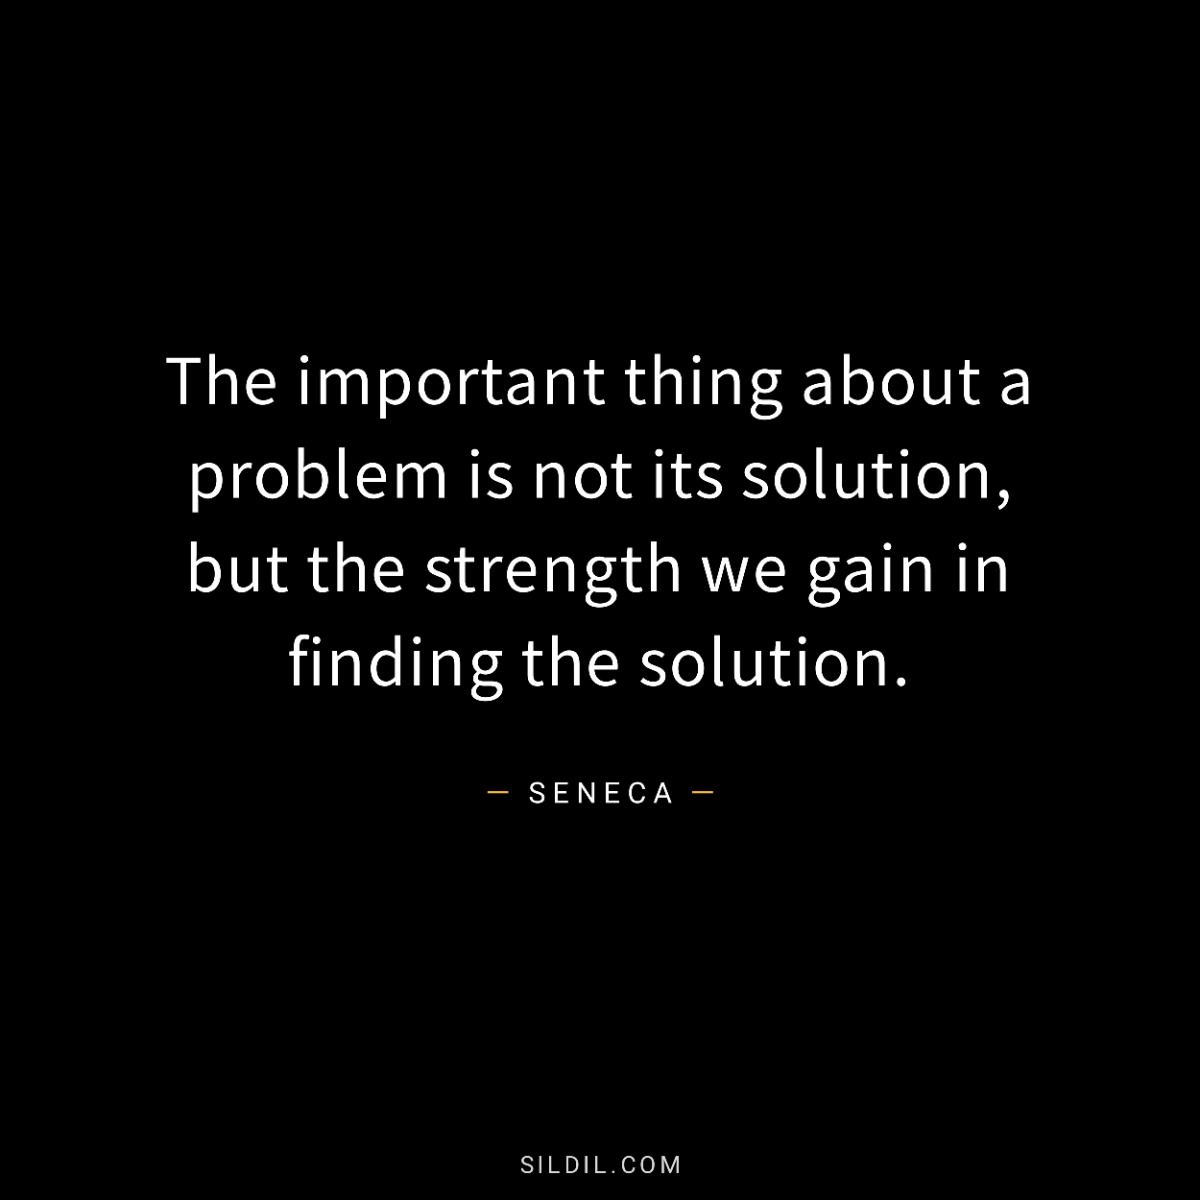 The important thing about a problem is not its solution, but the strength we gain in finding the solution.